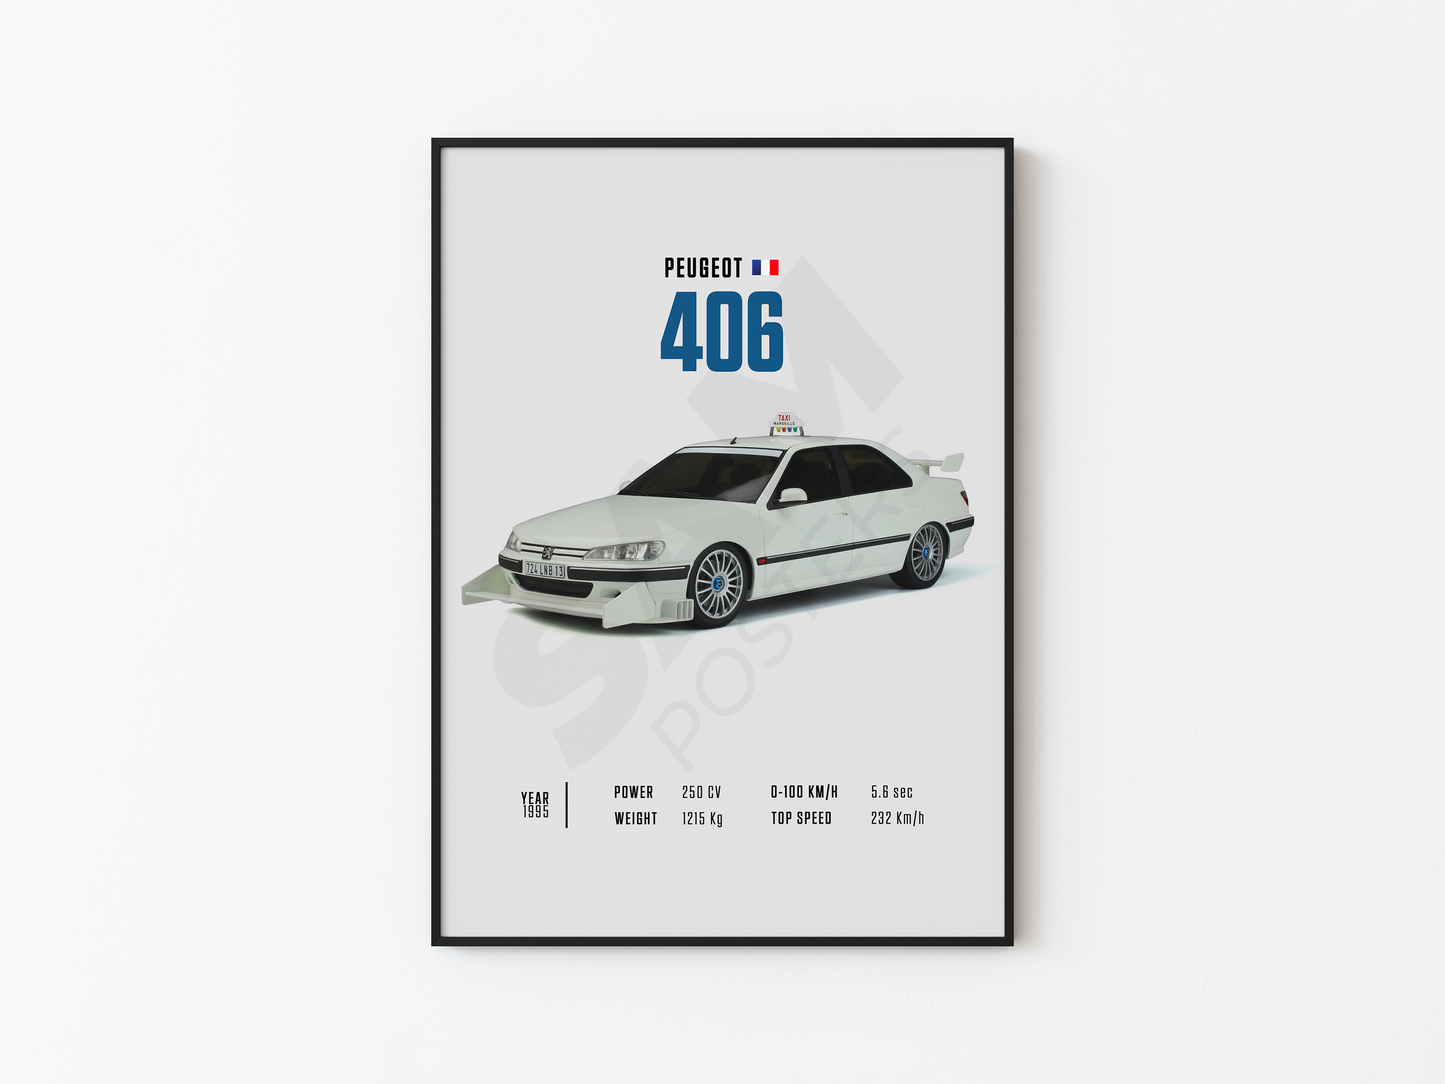 Peugeot 406 Taxi Poster